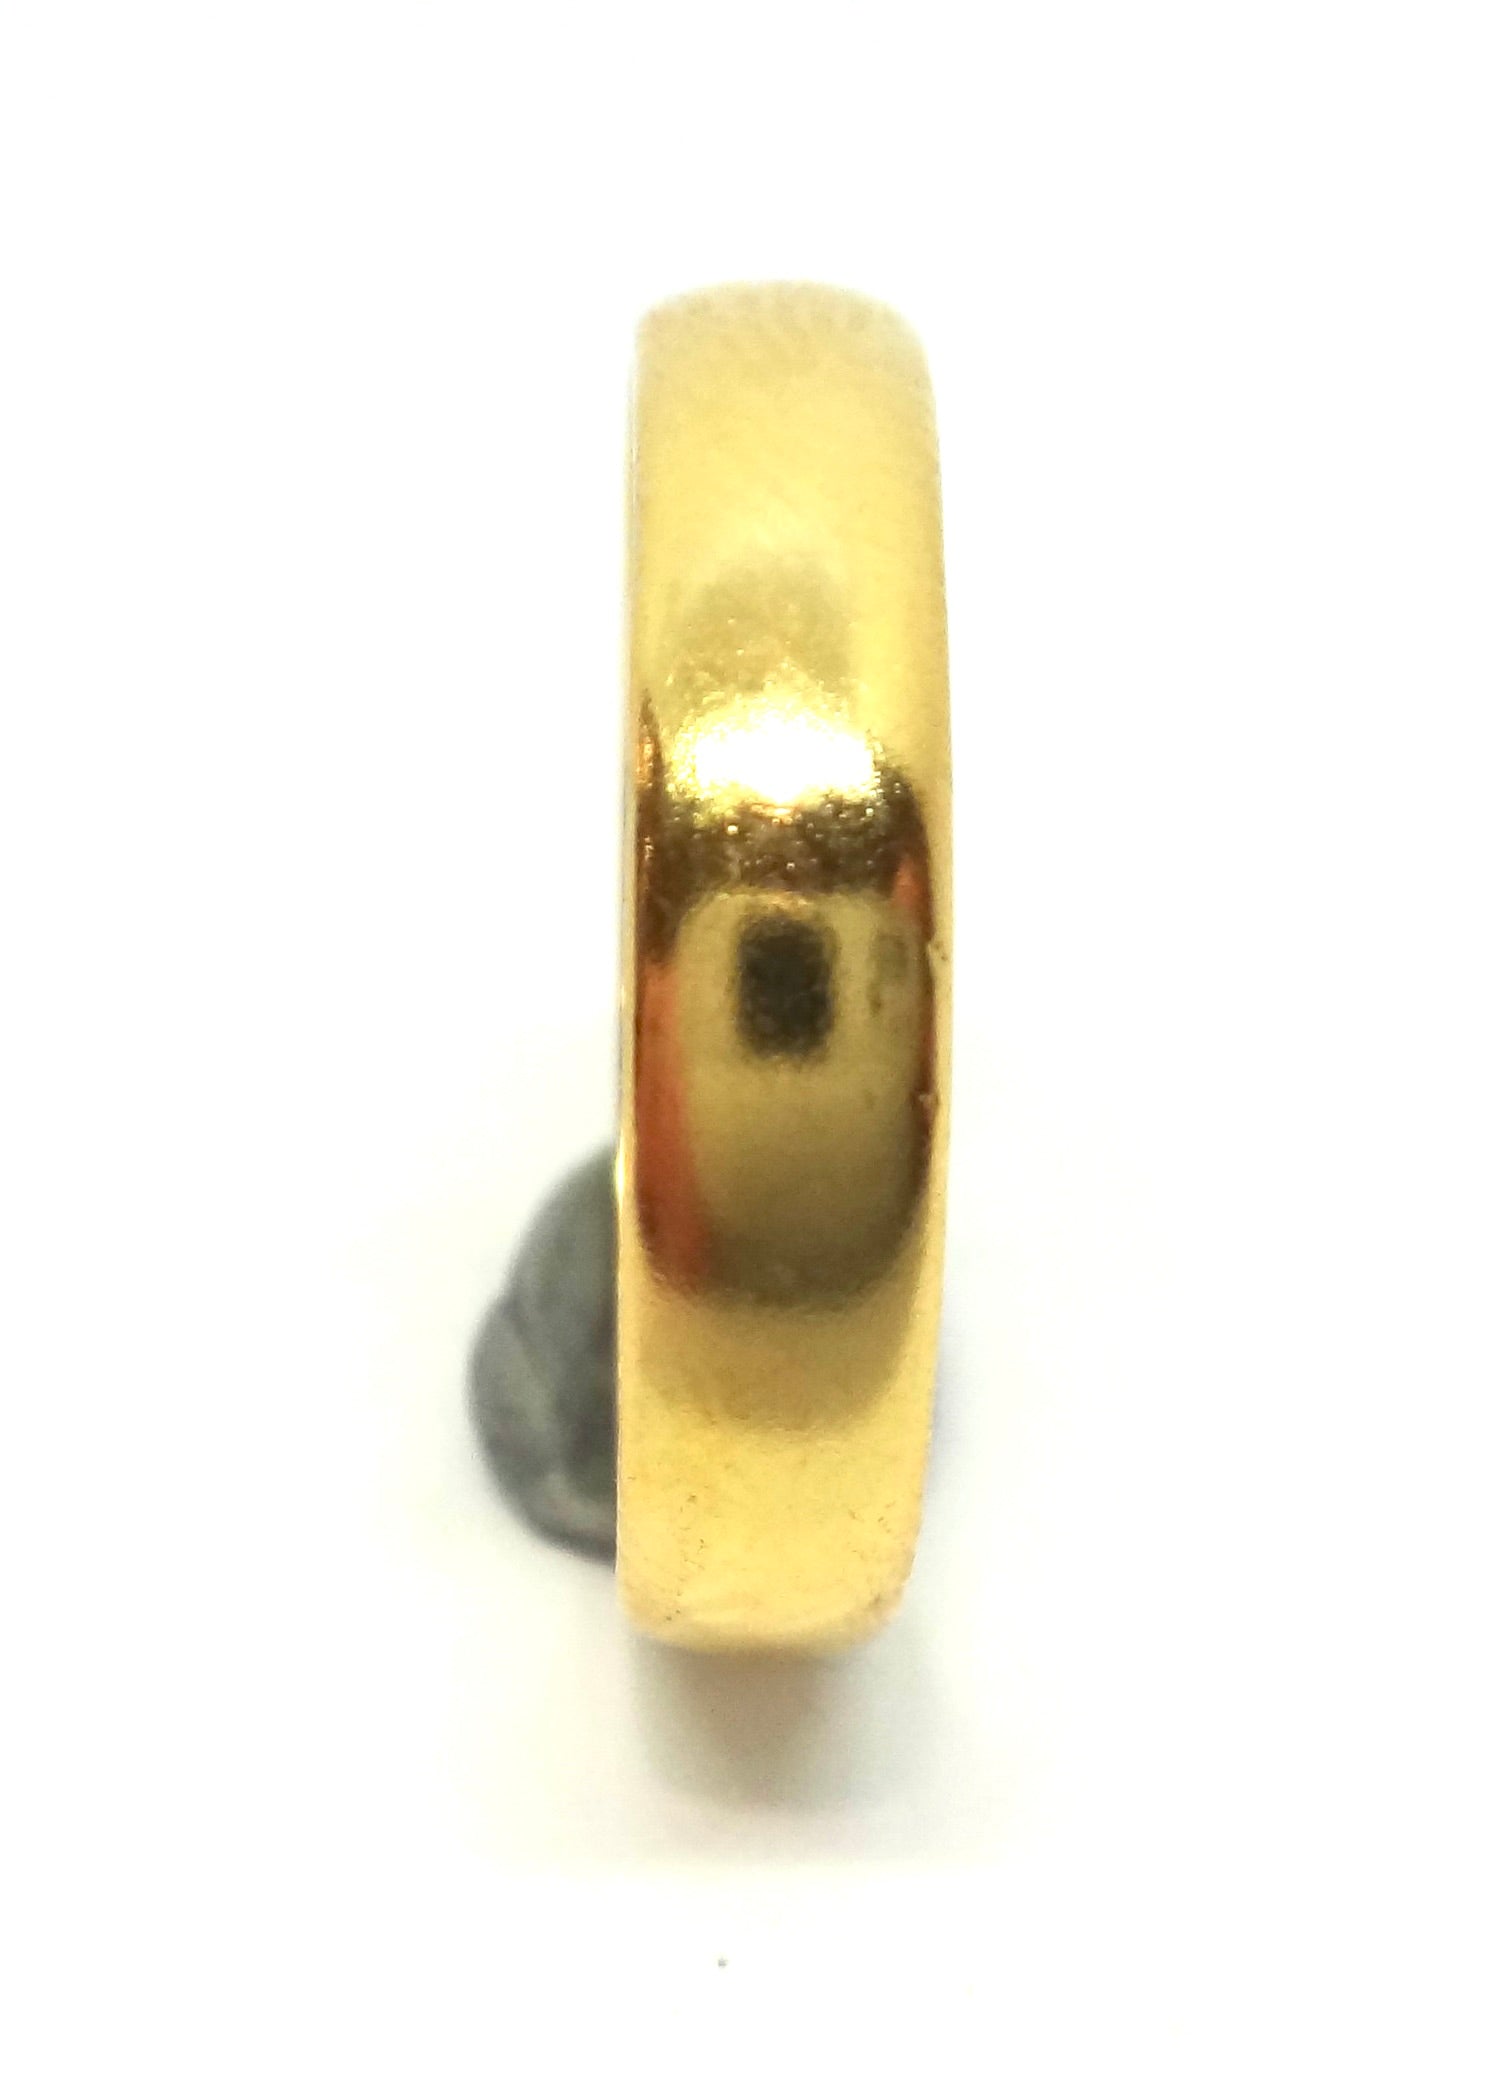 Australian Made ANTIQUE 22ct Yellow GOLD Band Ring c.1930